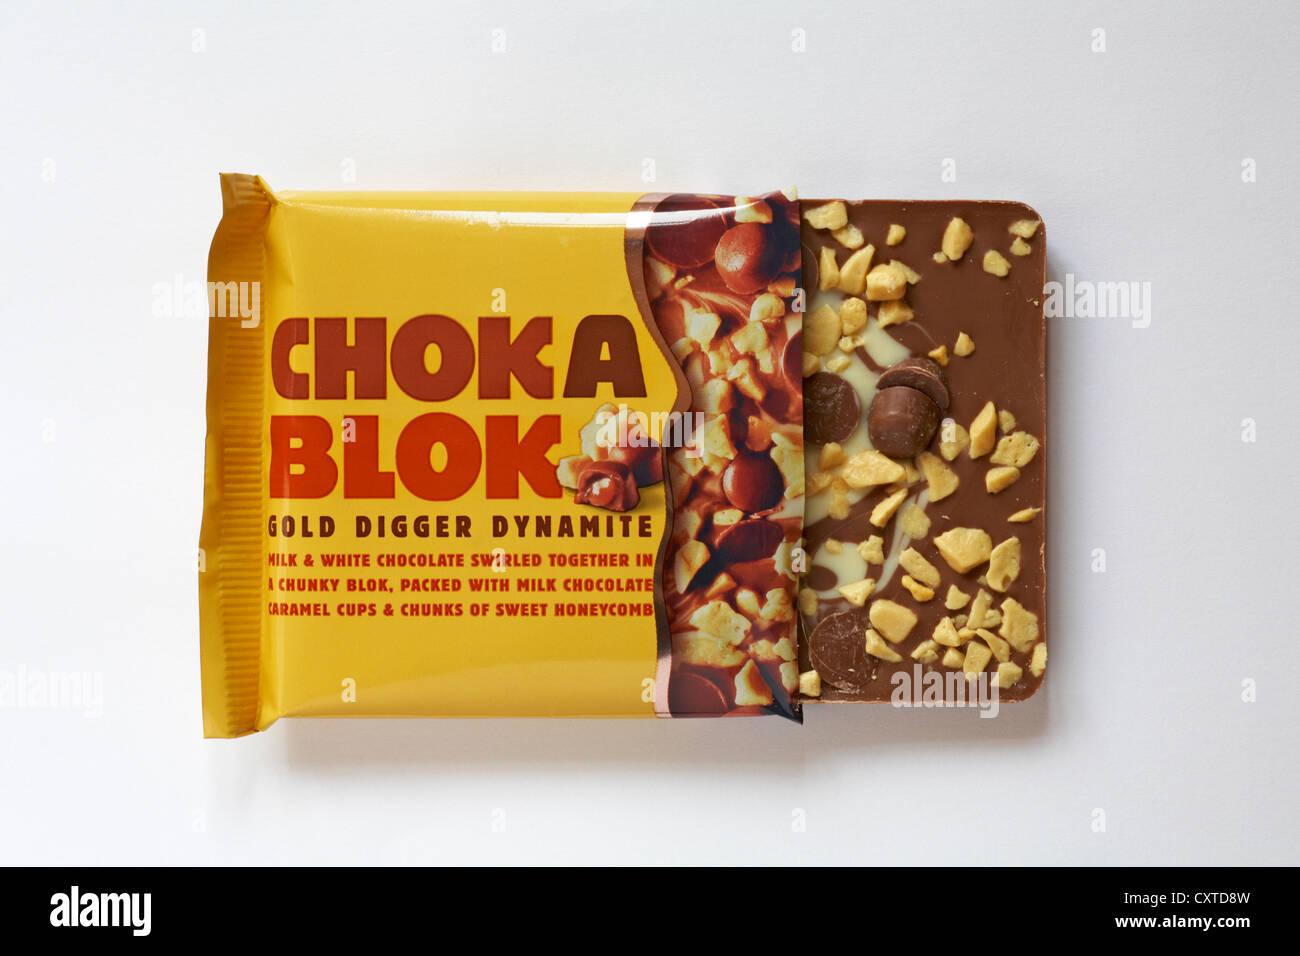 Choc a blok gold digger dynamite chocolate bar isolated on white background  - opened to show contents Stock Photo - Alamy